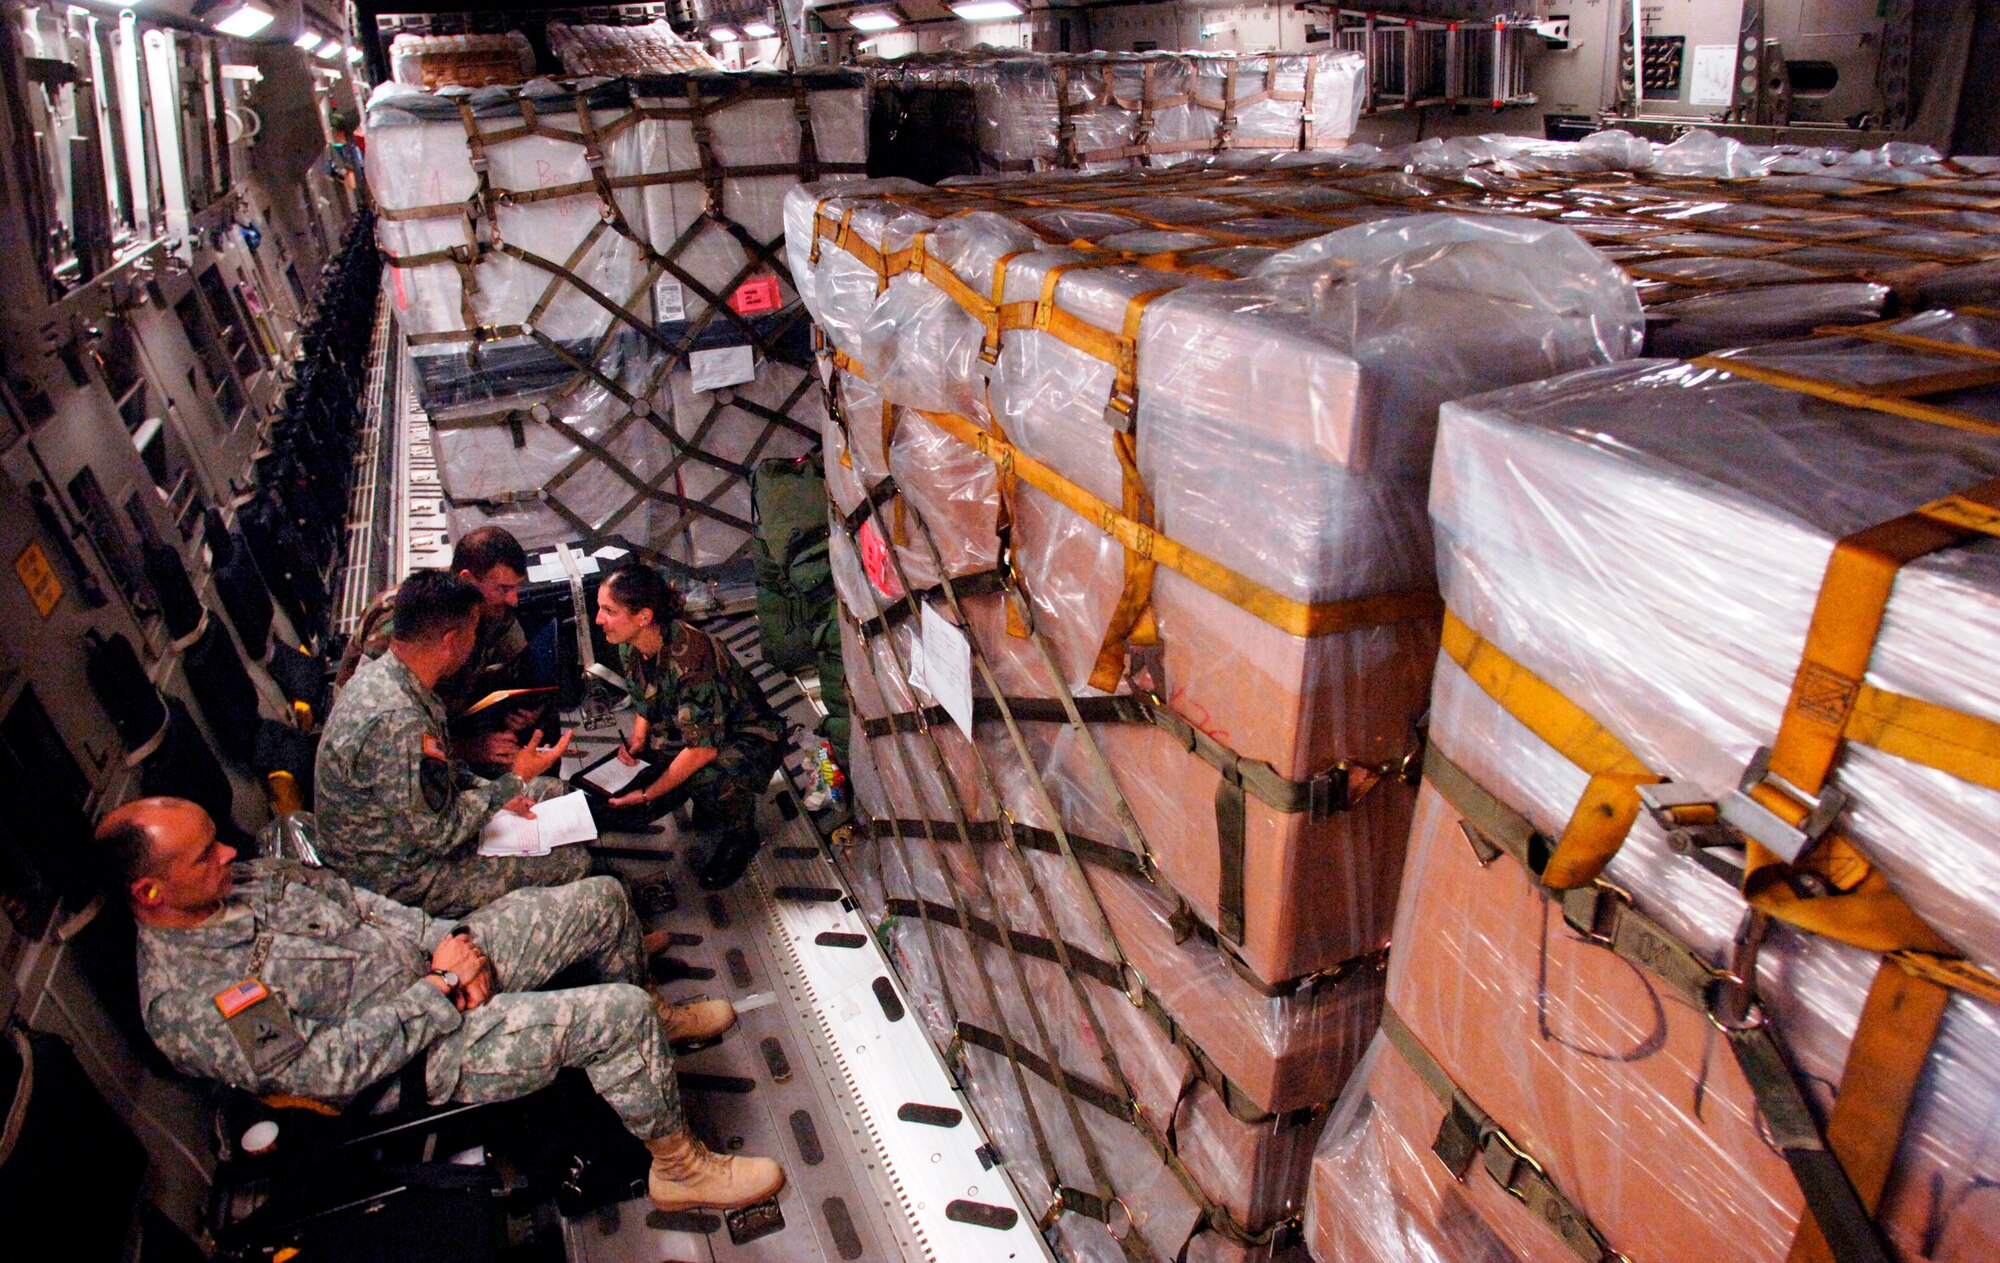 While en route to Tbilisi, Georgia, from Ramstein Air Base, Germany, a small group of U.S. Army, Navy and Air Force officers discuss details of the joint humanitarian assistance delivery.  The delivery consisted of $1M in U.S.-donated medical supplies, blankets, sleeping bags and bed sheets for the people of the Republic of Georgia. 
(Air Force Photo by Master Sgt. Scott Wagers / AFNEWS)(Released)